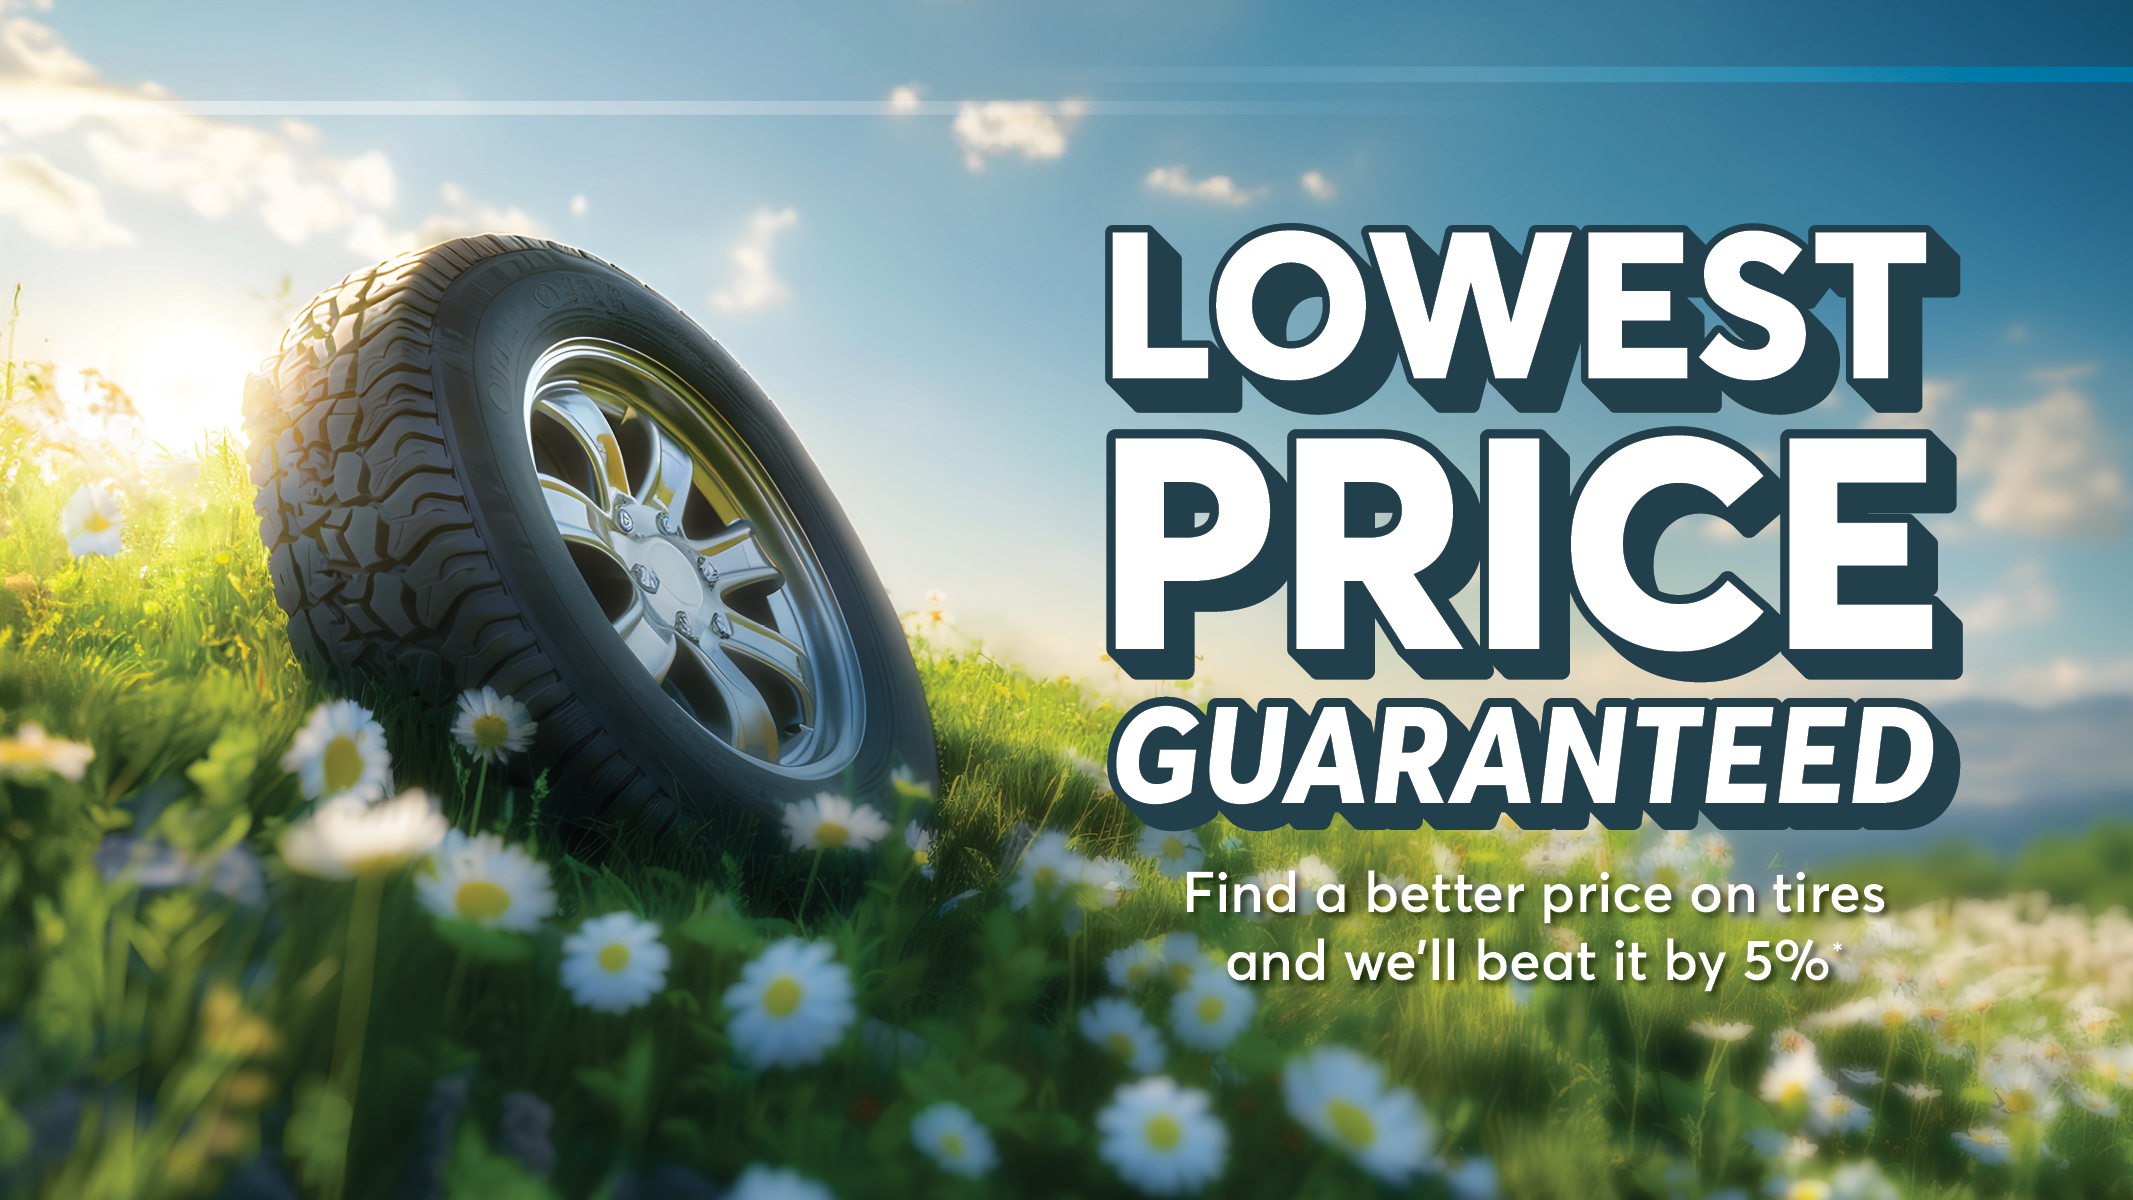 Store Your Tires With Us - Get FREE Tire Installation! - Vancouver